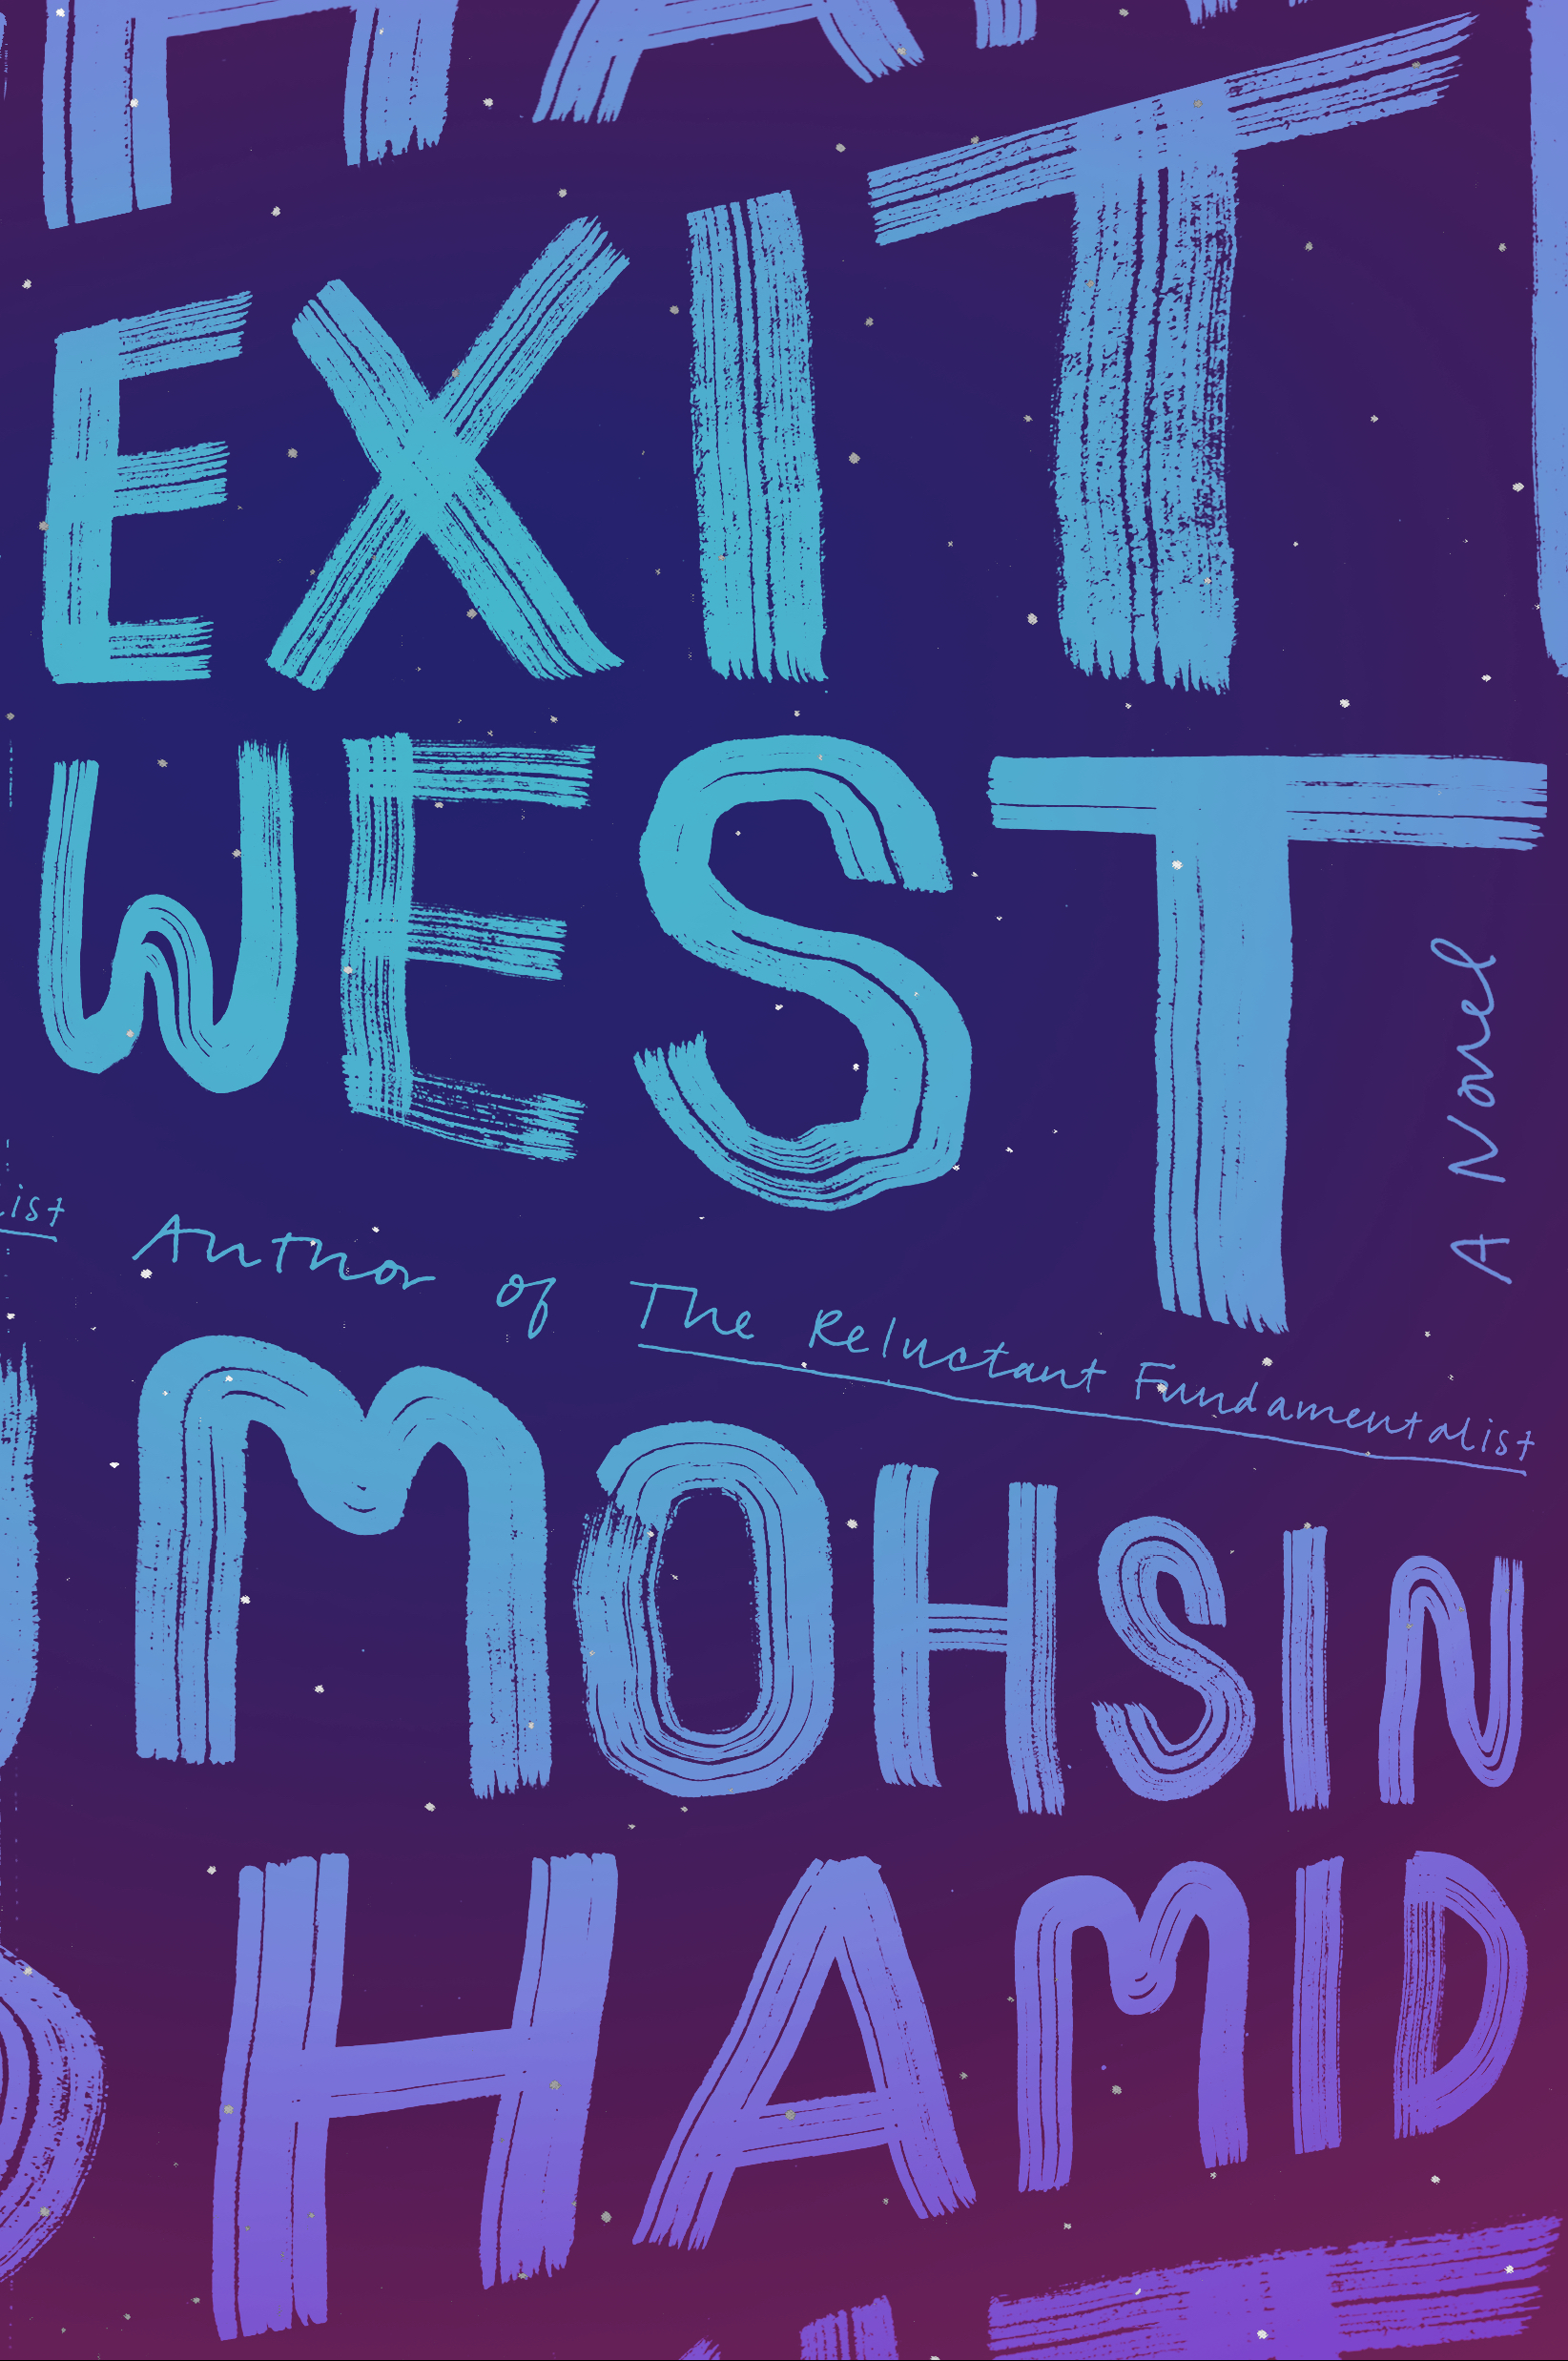 "Exit West" by Mohsin Hamid